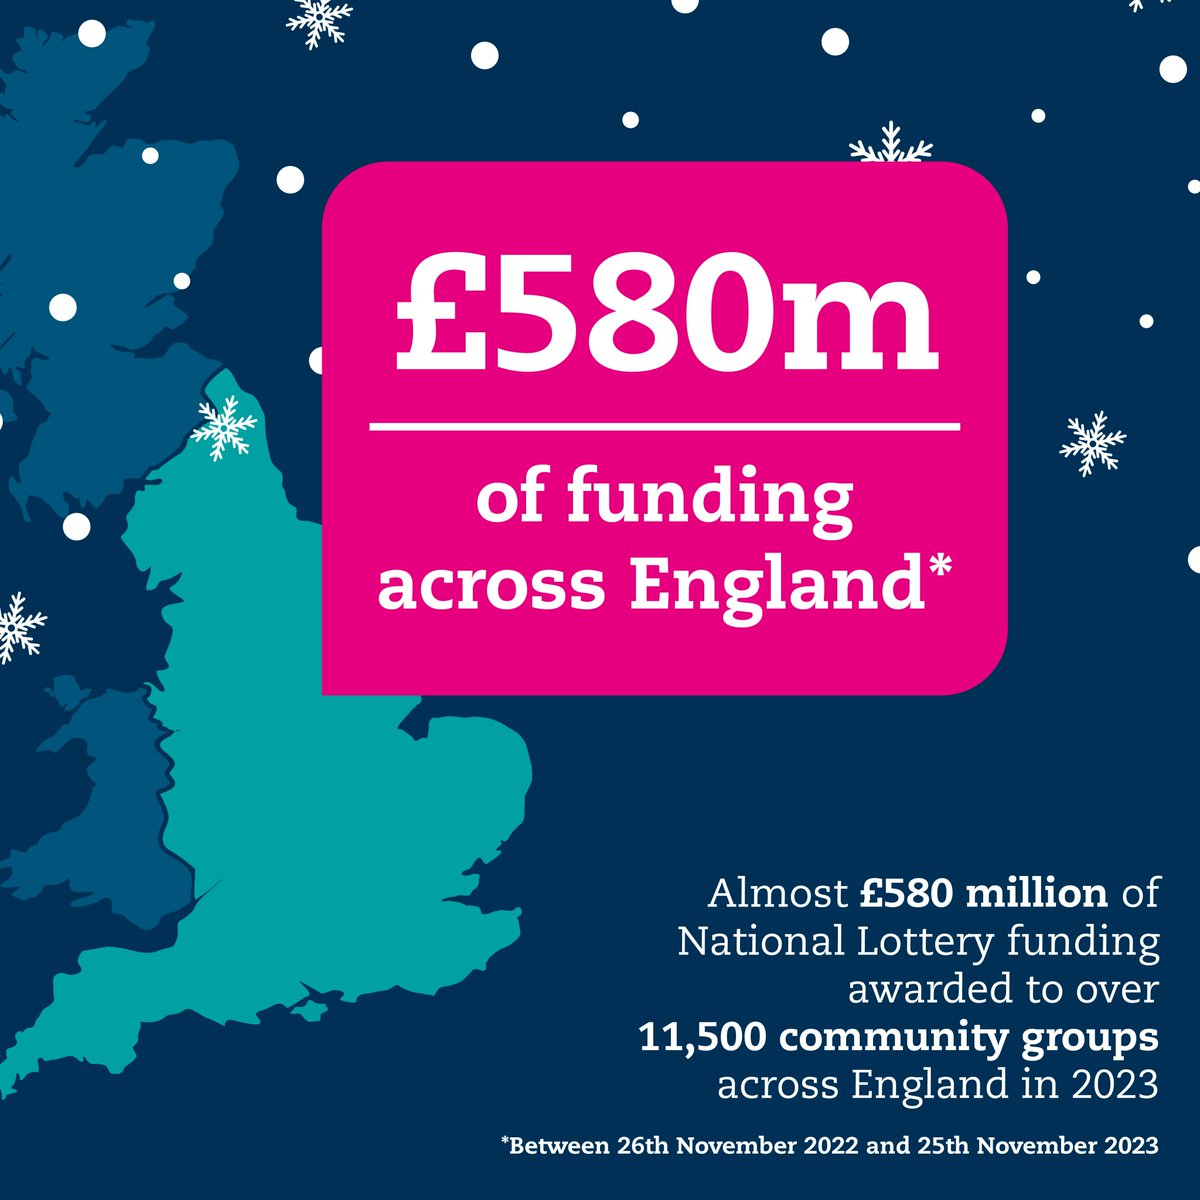 Ending the year with some festive funding cheer! 🎊 Thanks to #NationalLottery players, we've awarded almost £580m to over 11,500 community groups across England in 2023. Find out how National Lottery funding is being used to strengthen society and improve lives. 👇